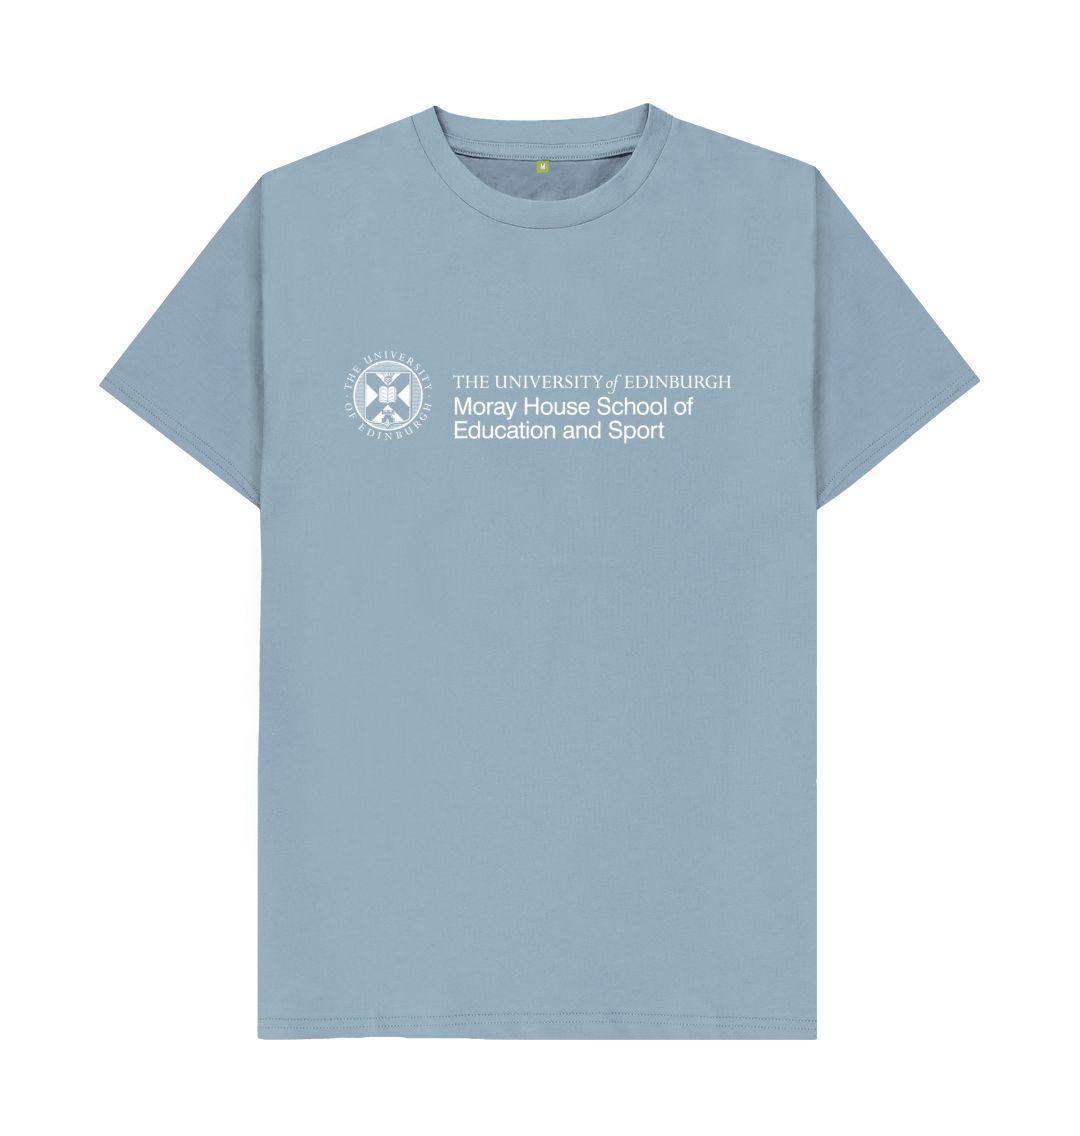 Stone Blue Moray House School of Education and Sport T-Shirt